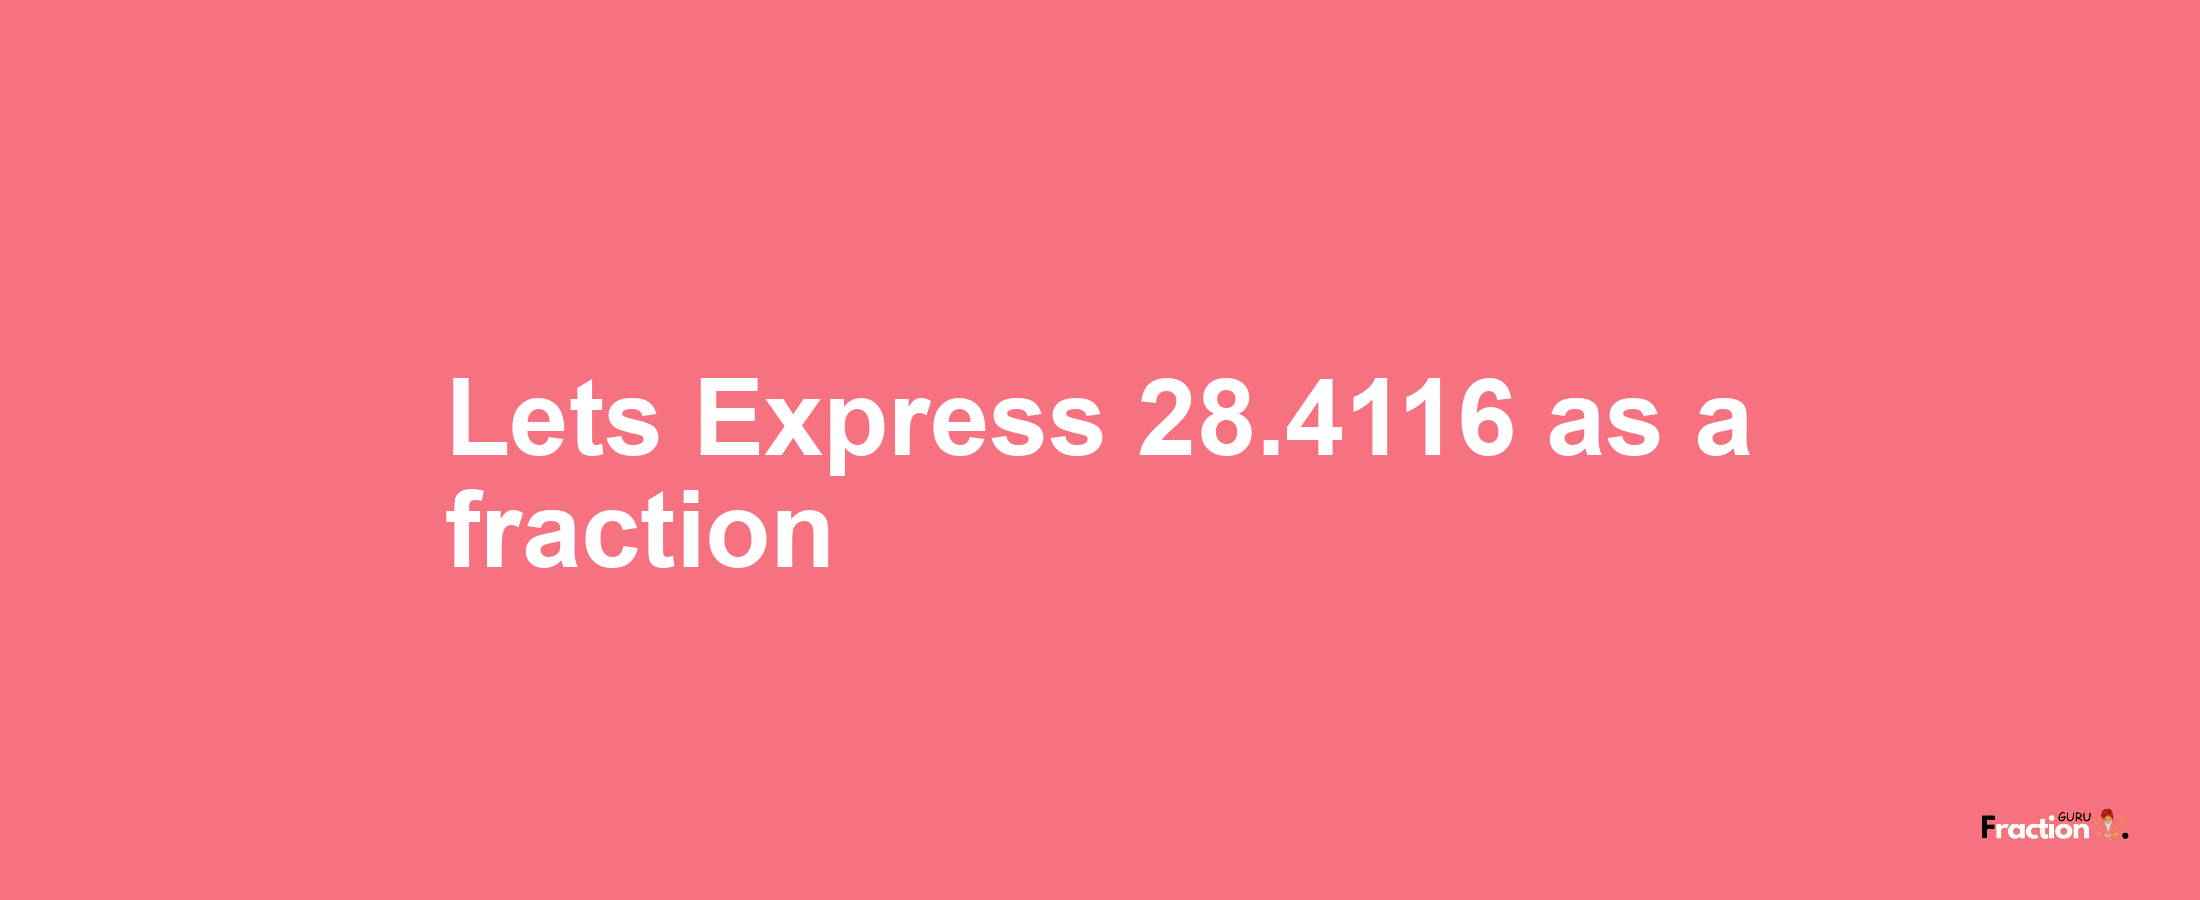 Lets Express 28.4116 as afraction